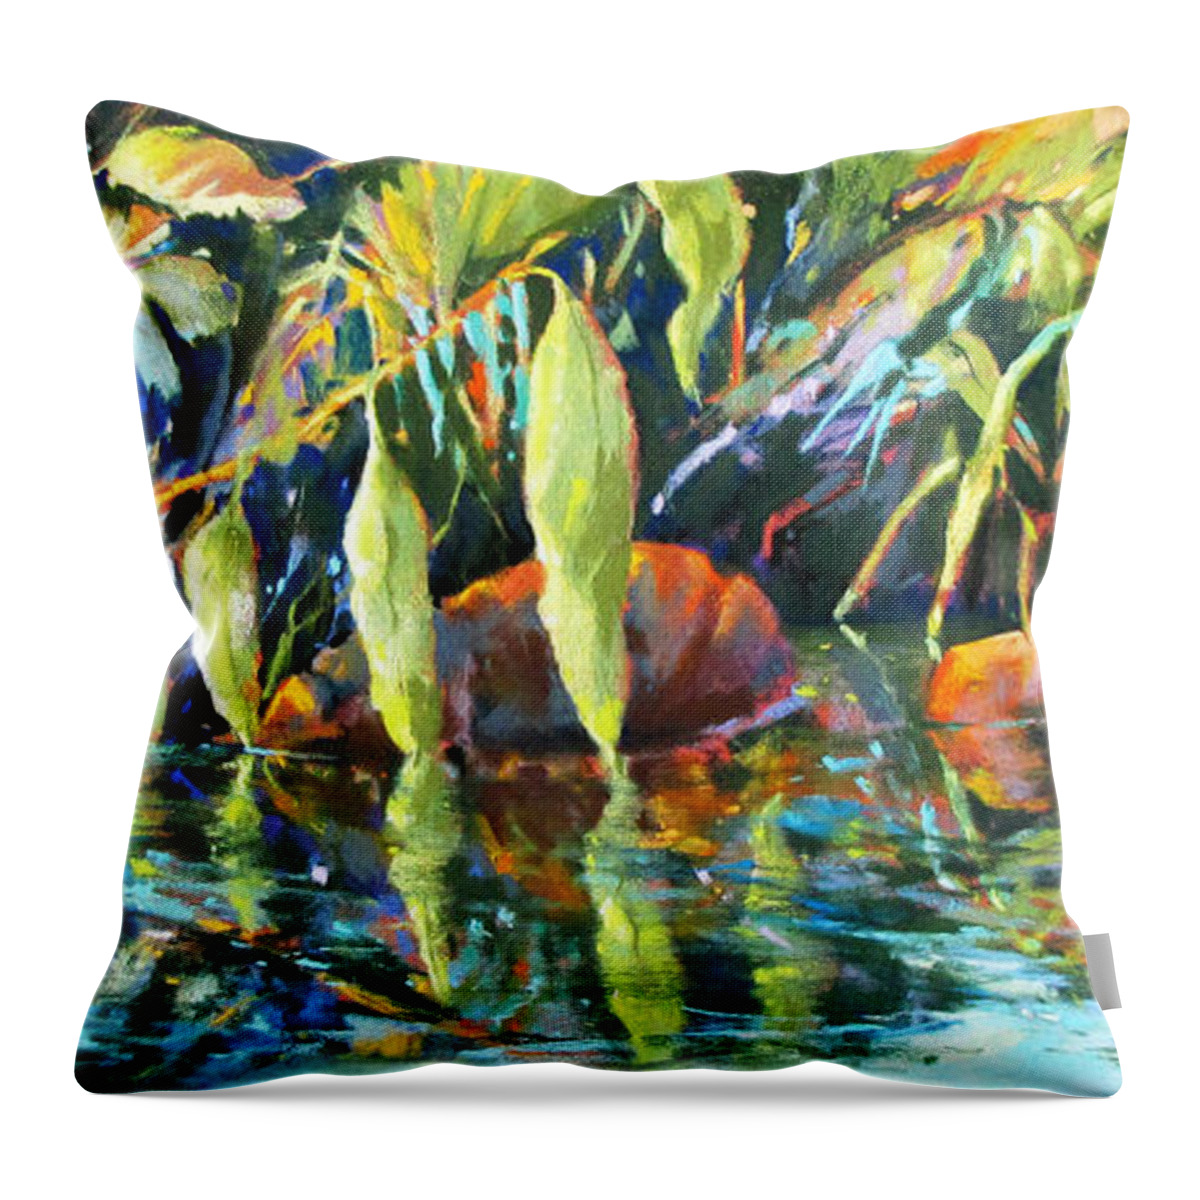 Jungle Leaves Throw Pillow featuring the painting Jungle Reflections 2 by Rae Andrews